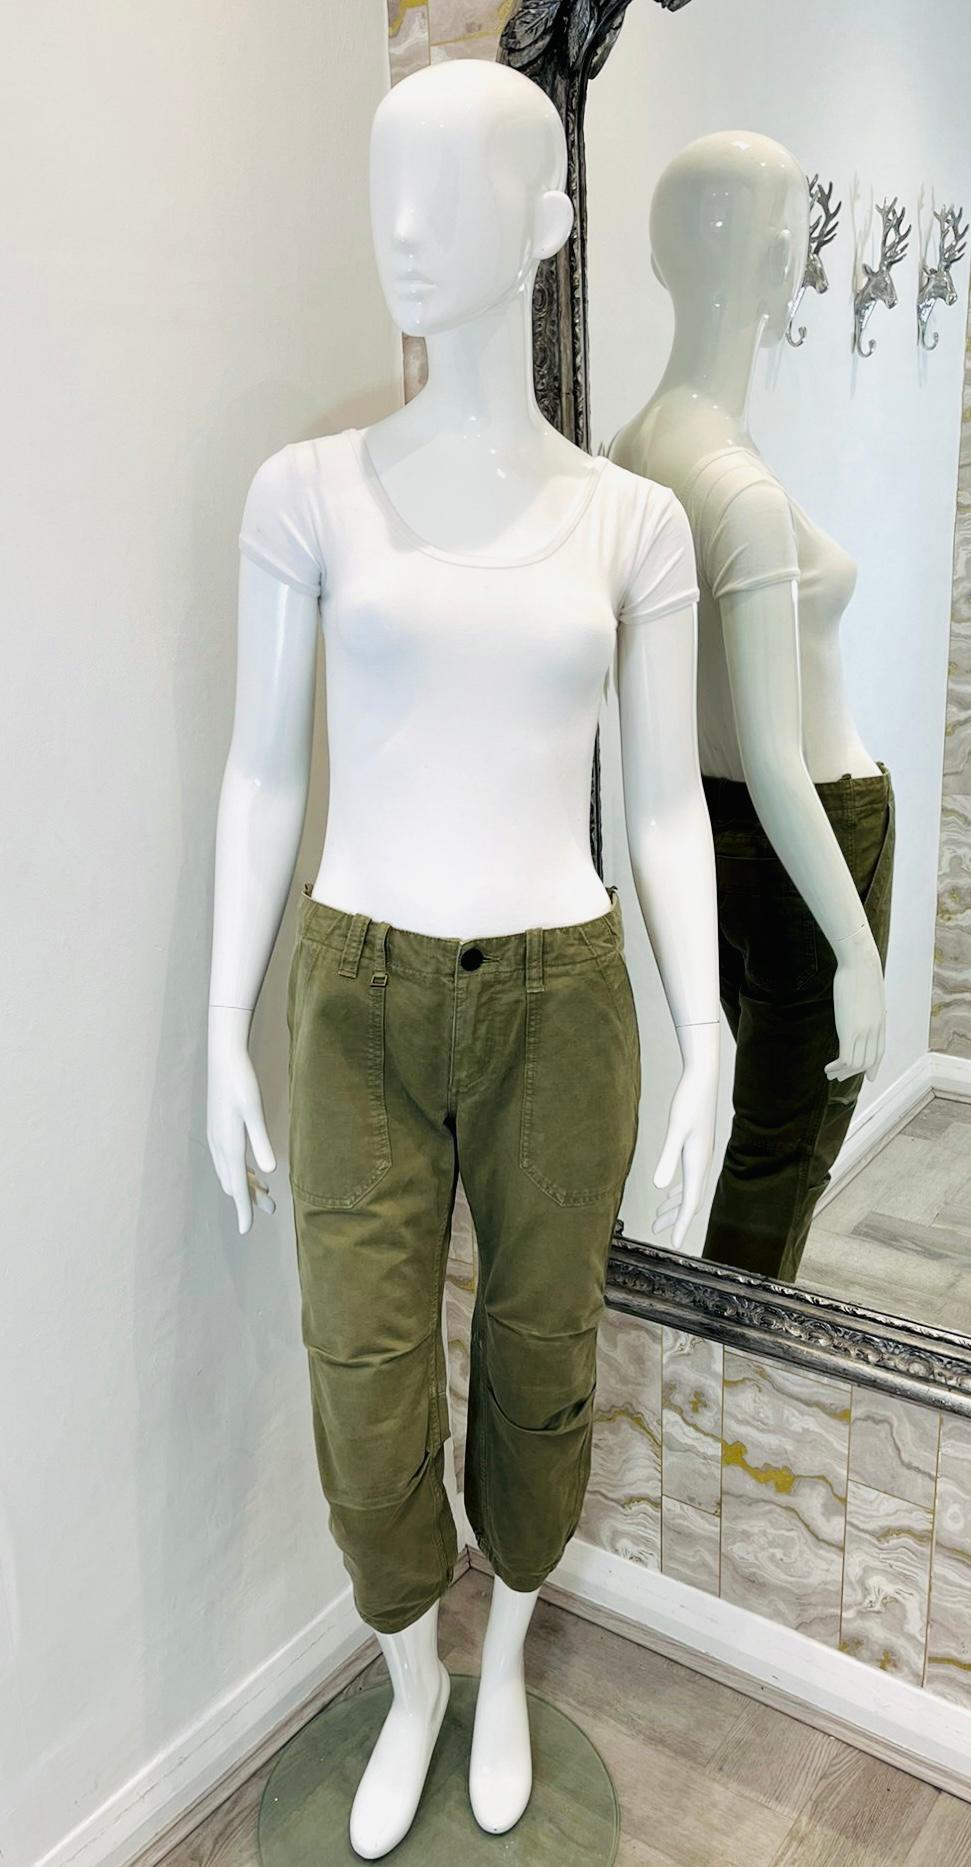 Zadig & Voltaire Cropped Cotton Trousers

Khaki, military styled trousers designed with cropped leg and elasticated cuffs.

Featuring belt loops, side and rear pockets and zip and button closure.

Size – 36FR

Condition – Good (Abrasions on the